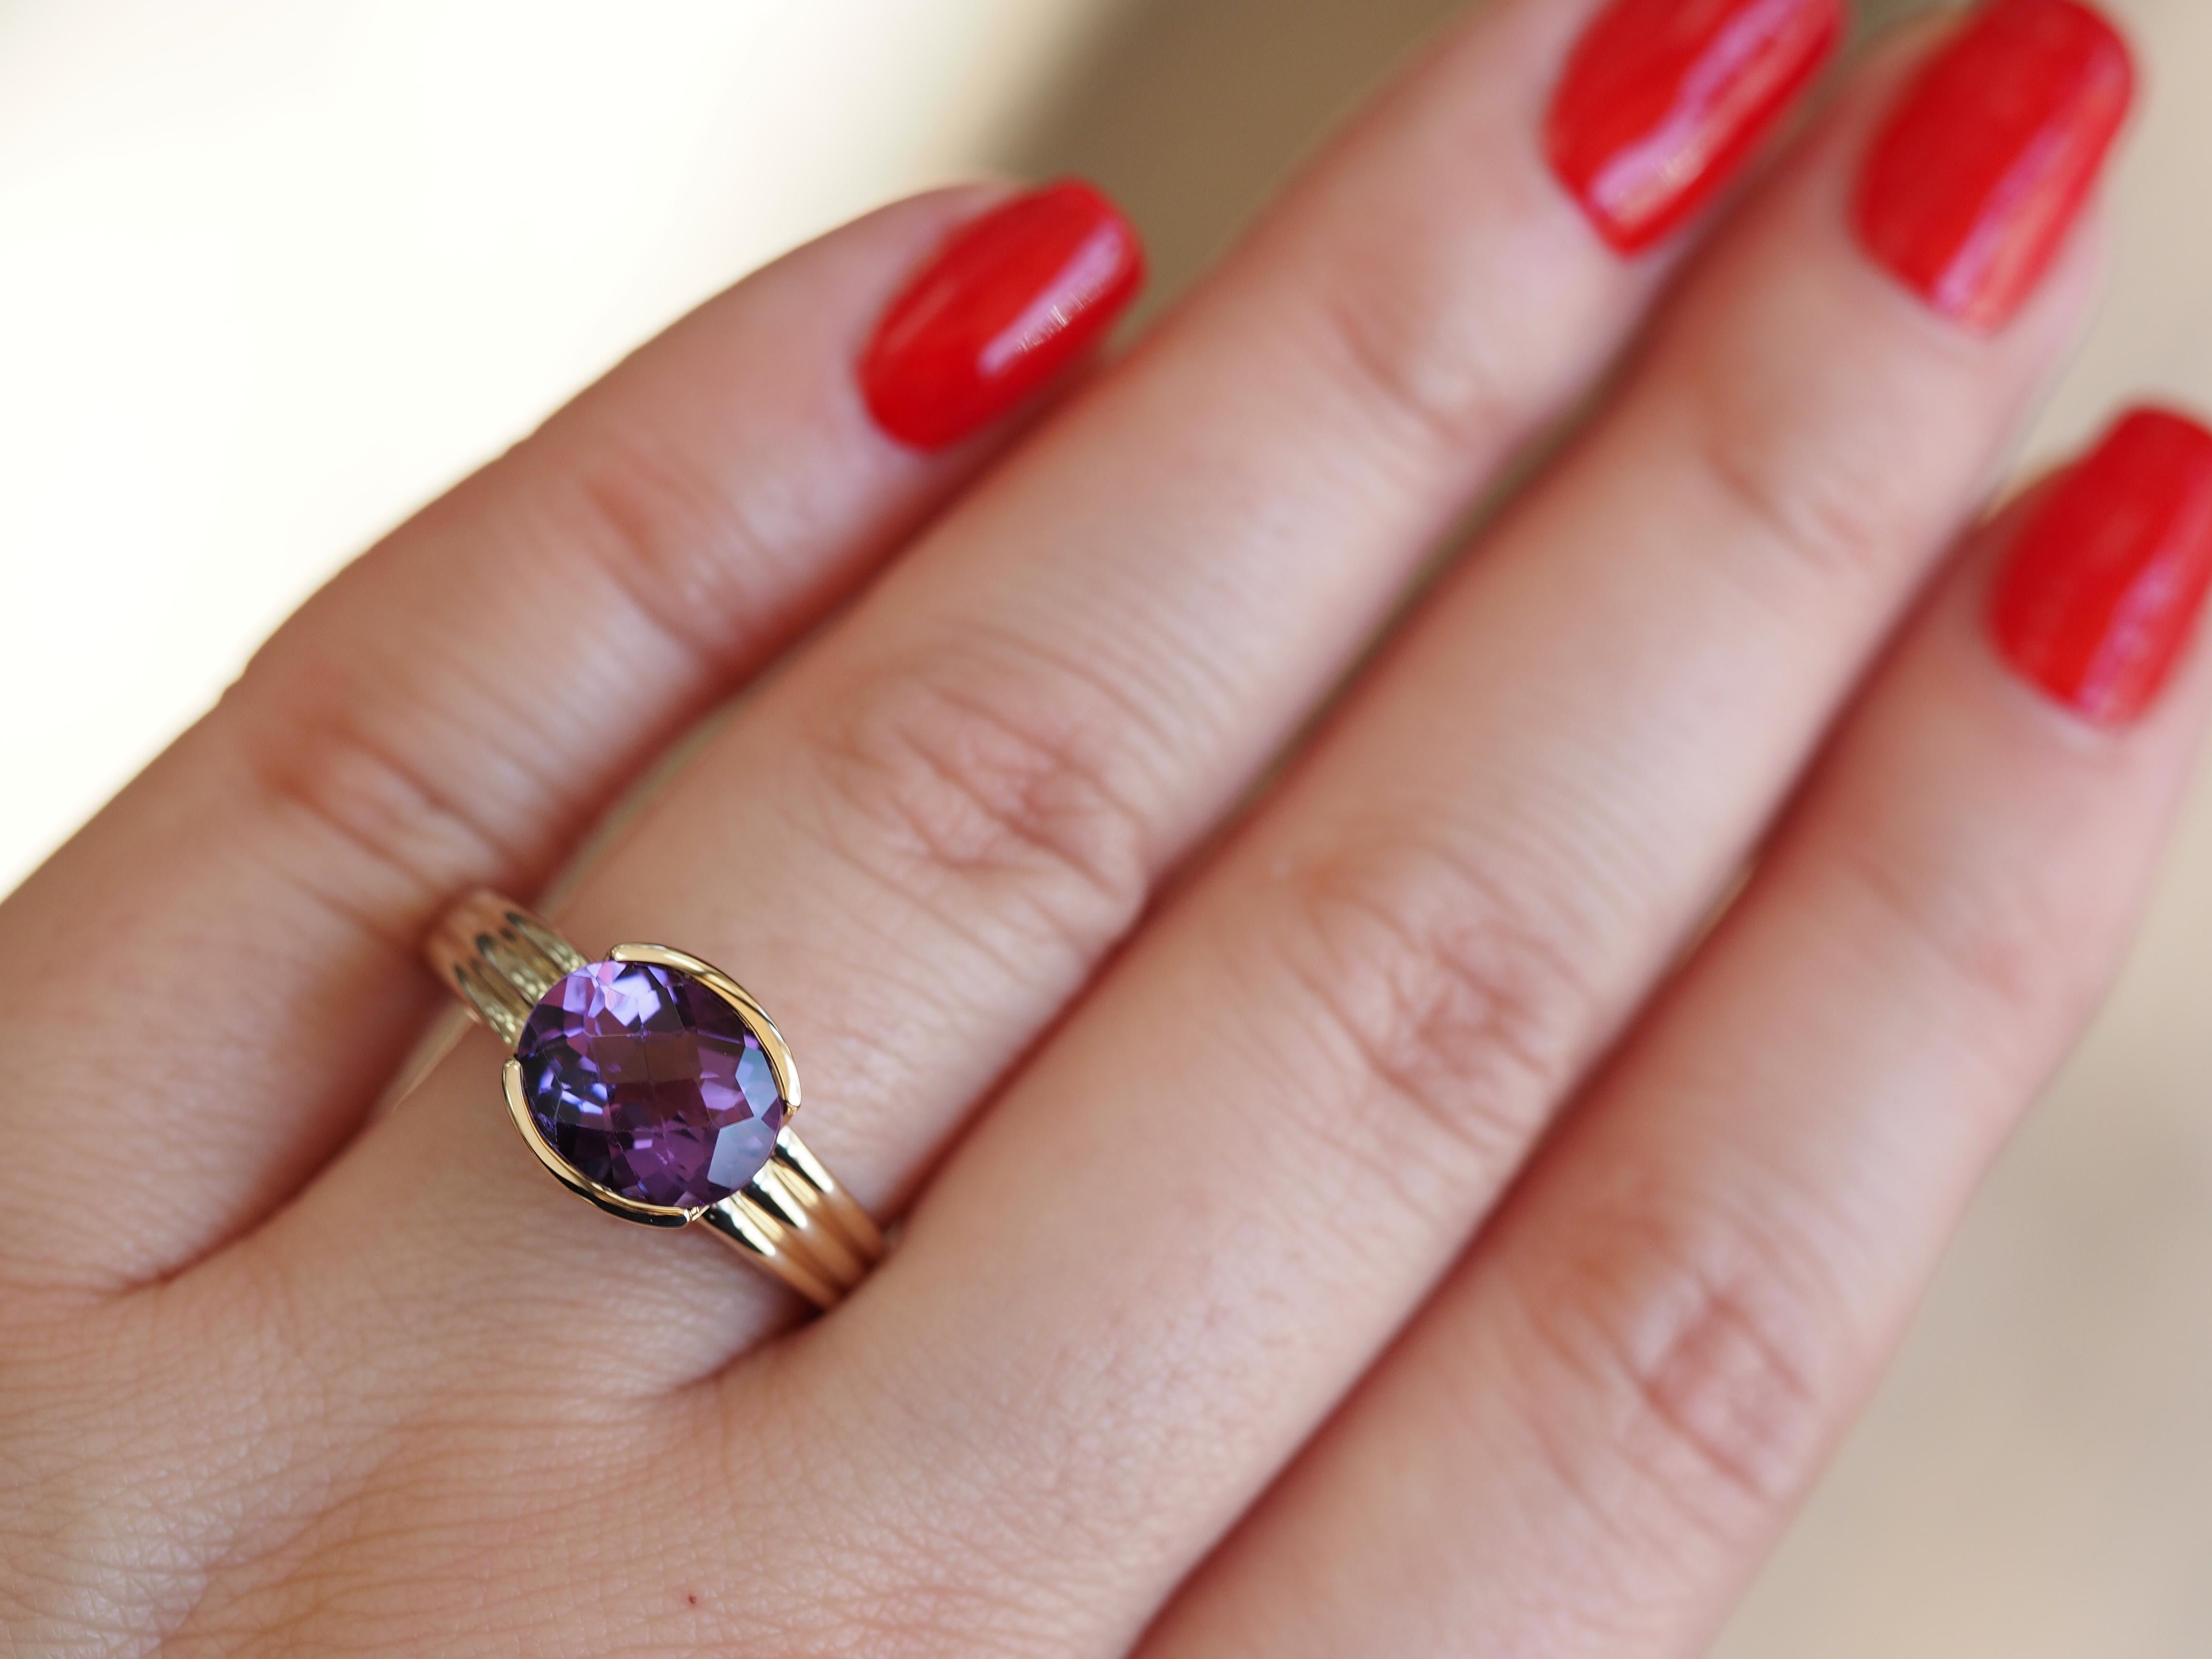 Absolutely gorgeous, this retro style ring is the perfect statement accessory. The ring is fashioned in classic 14 karat yellow gold and features a royal-purple amethyst center. Size 9, can be sized up or down upon request prior to shipping.

Metal